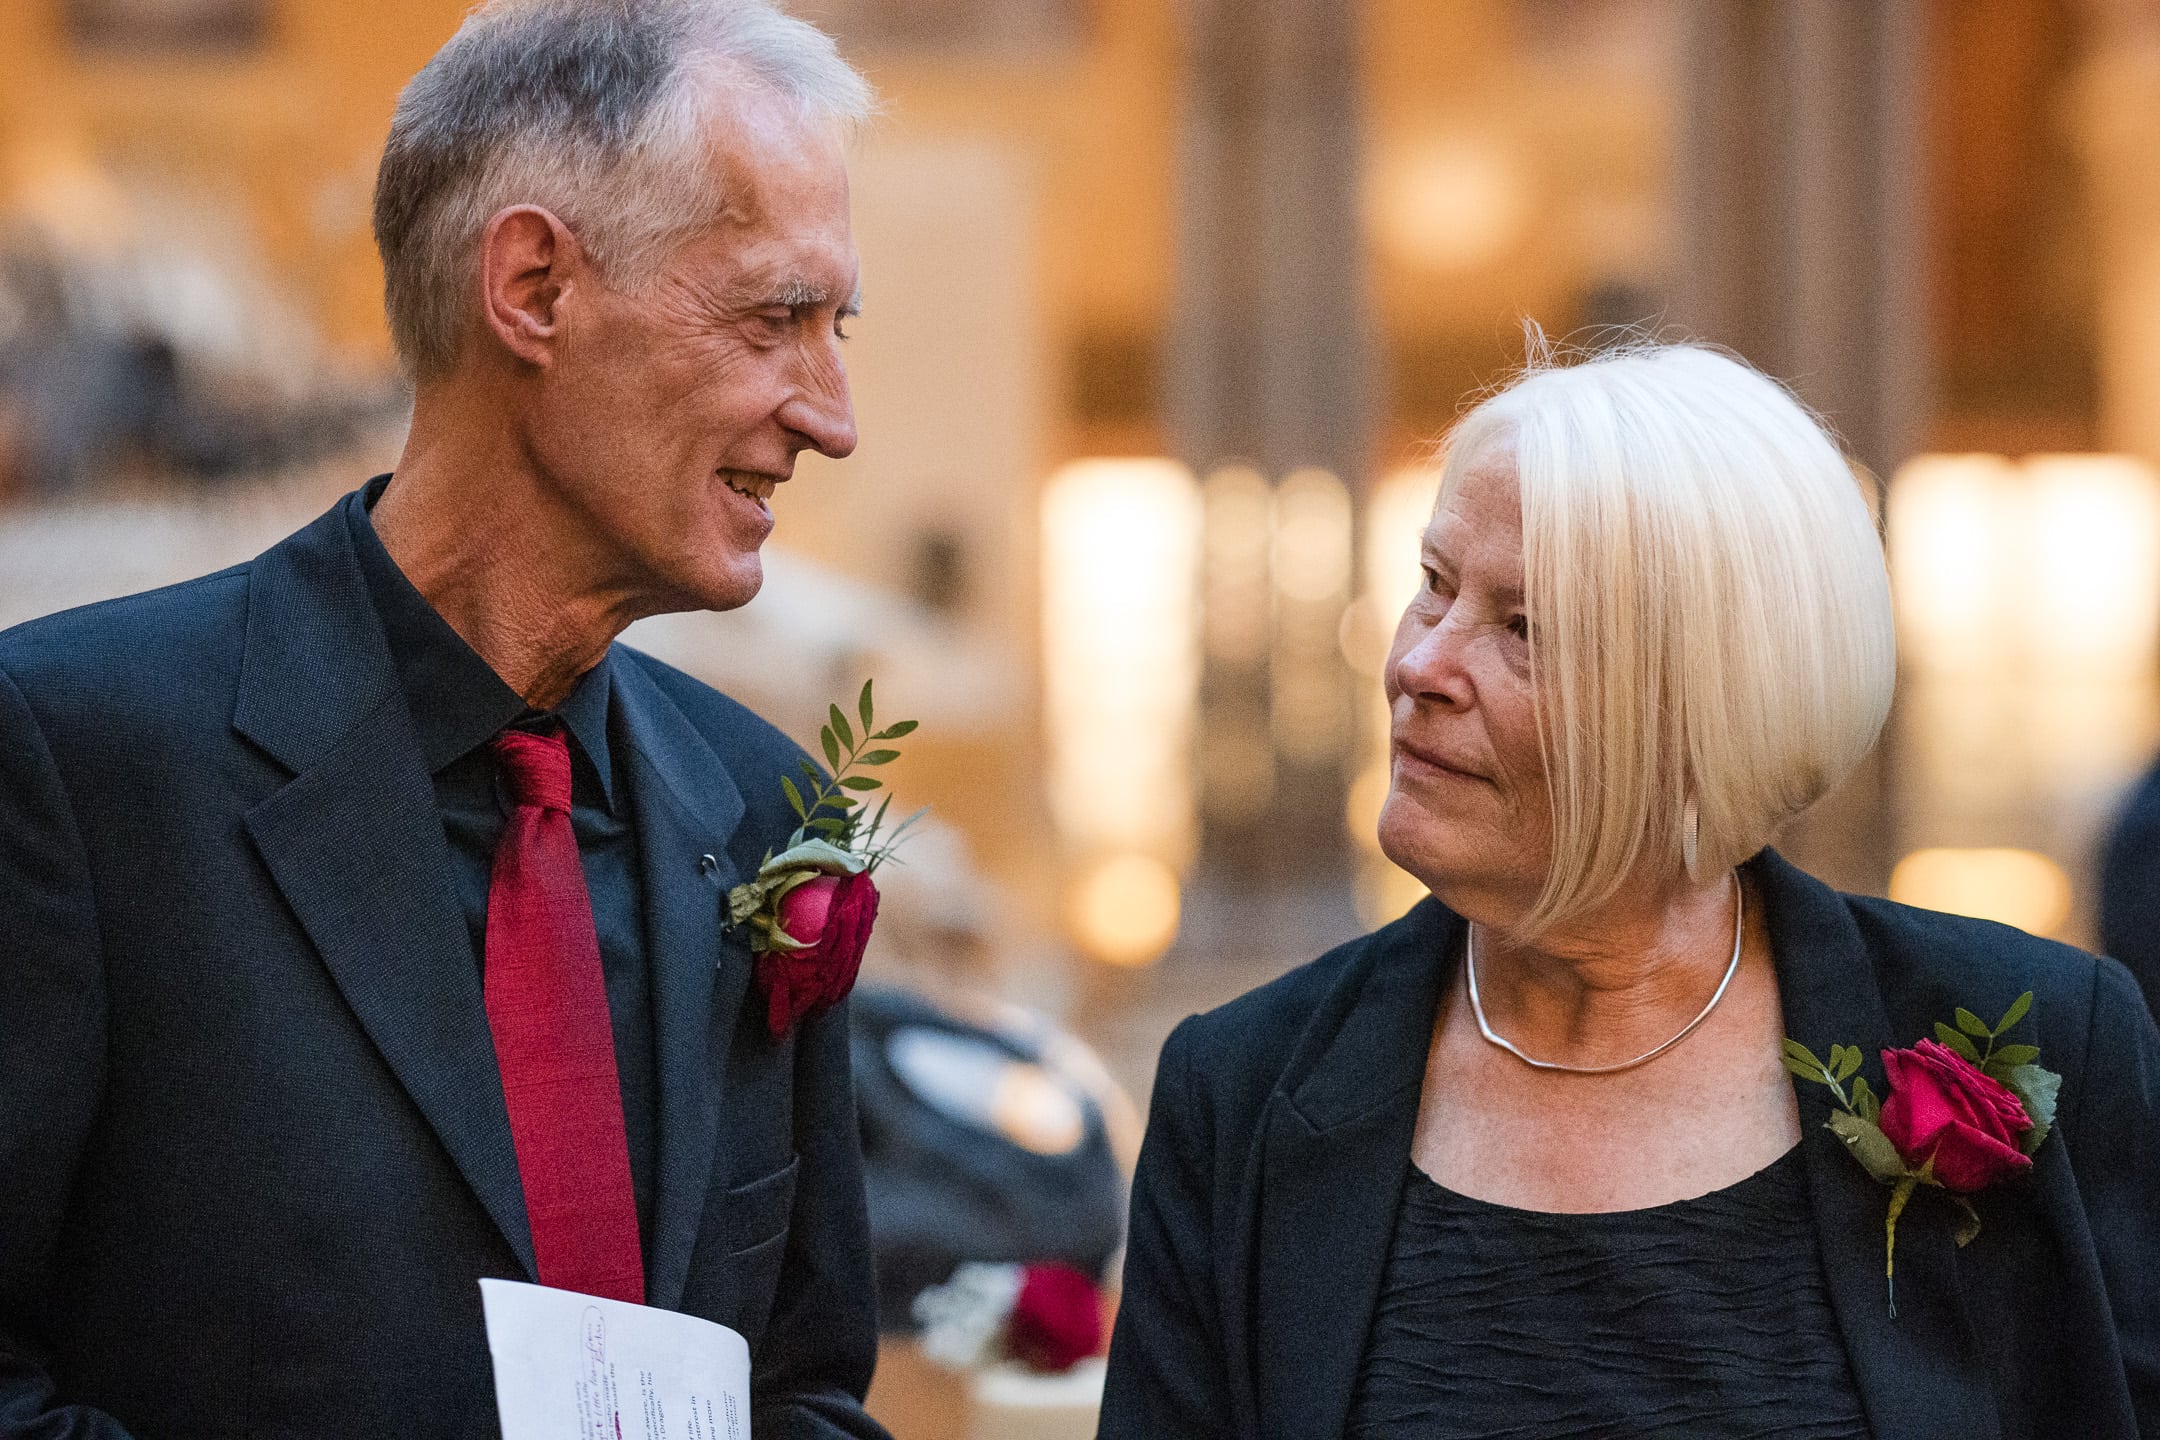 Mother and Father looking at each other at the Oxford Natural History Museum Wedding